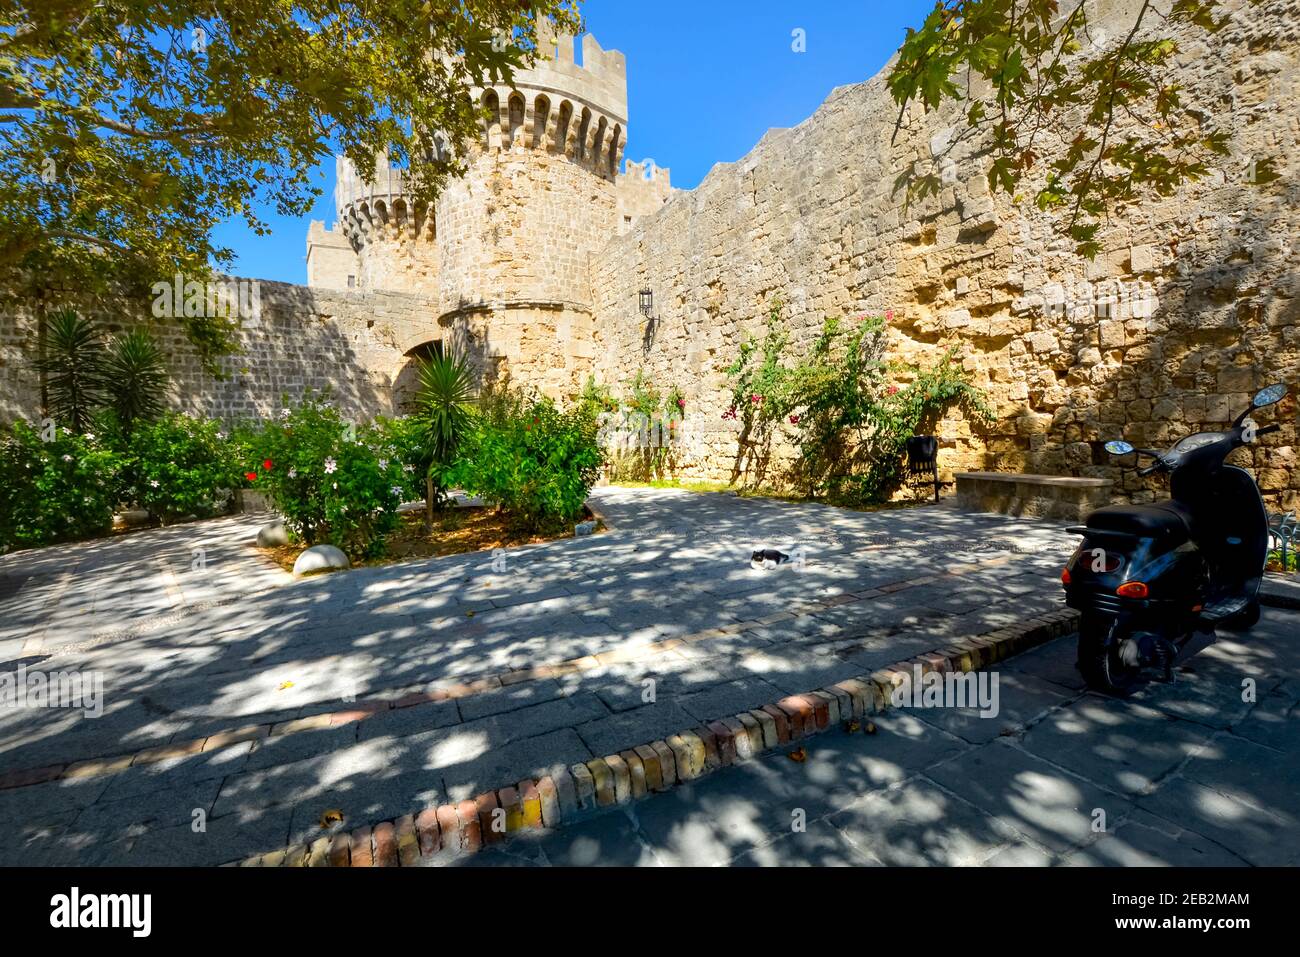 A black and white stray Greek cat relaxes in the shade with the ancient castle of Rhodes Greece in the background. Stock Photo